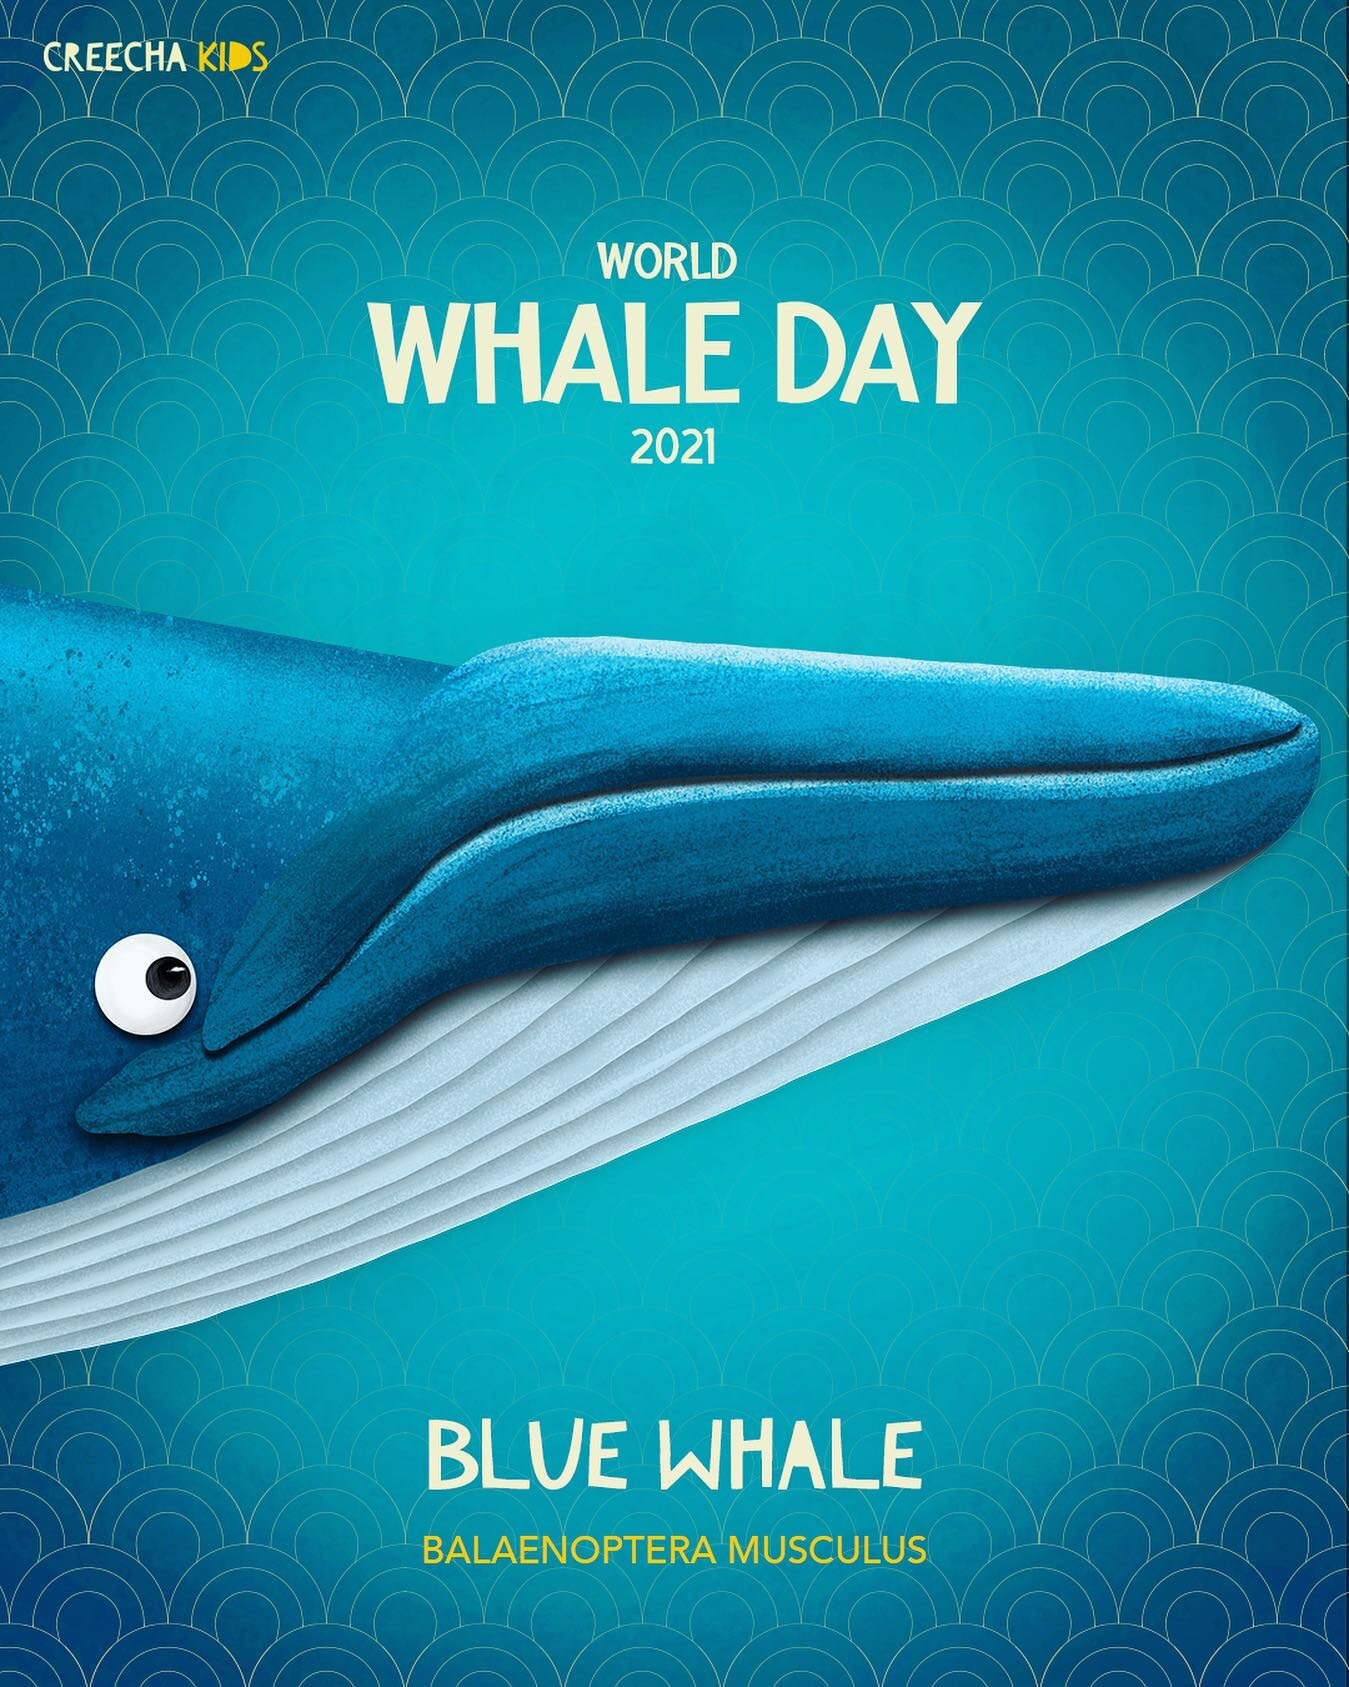 Today is World Whale Day! Today is all about spreading Whale awareness so please share this post to do your part!

The Blue Whale breaks almost every record in the animal world. It is larger, longer, heavier and louder than any other animal on Earth!